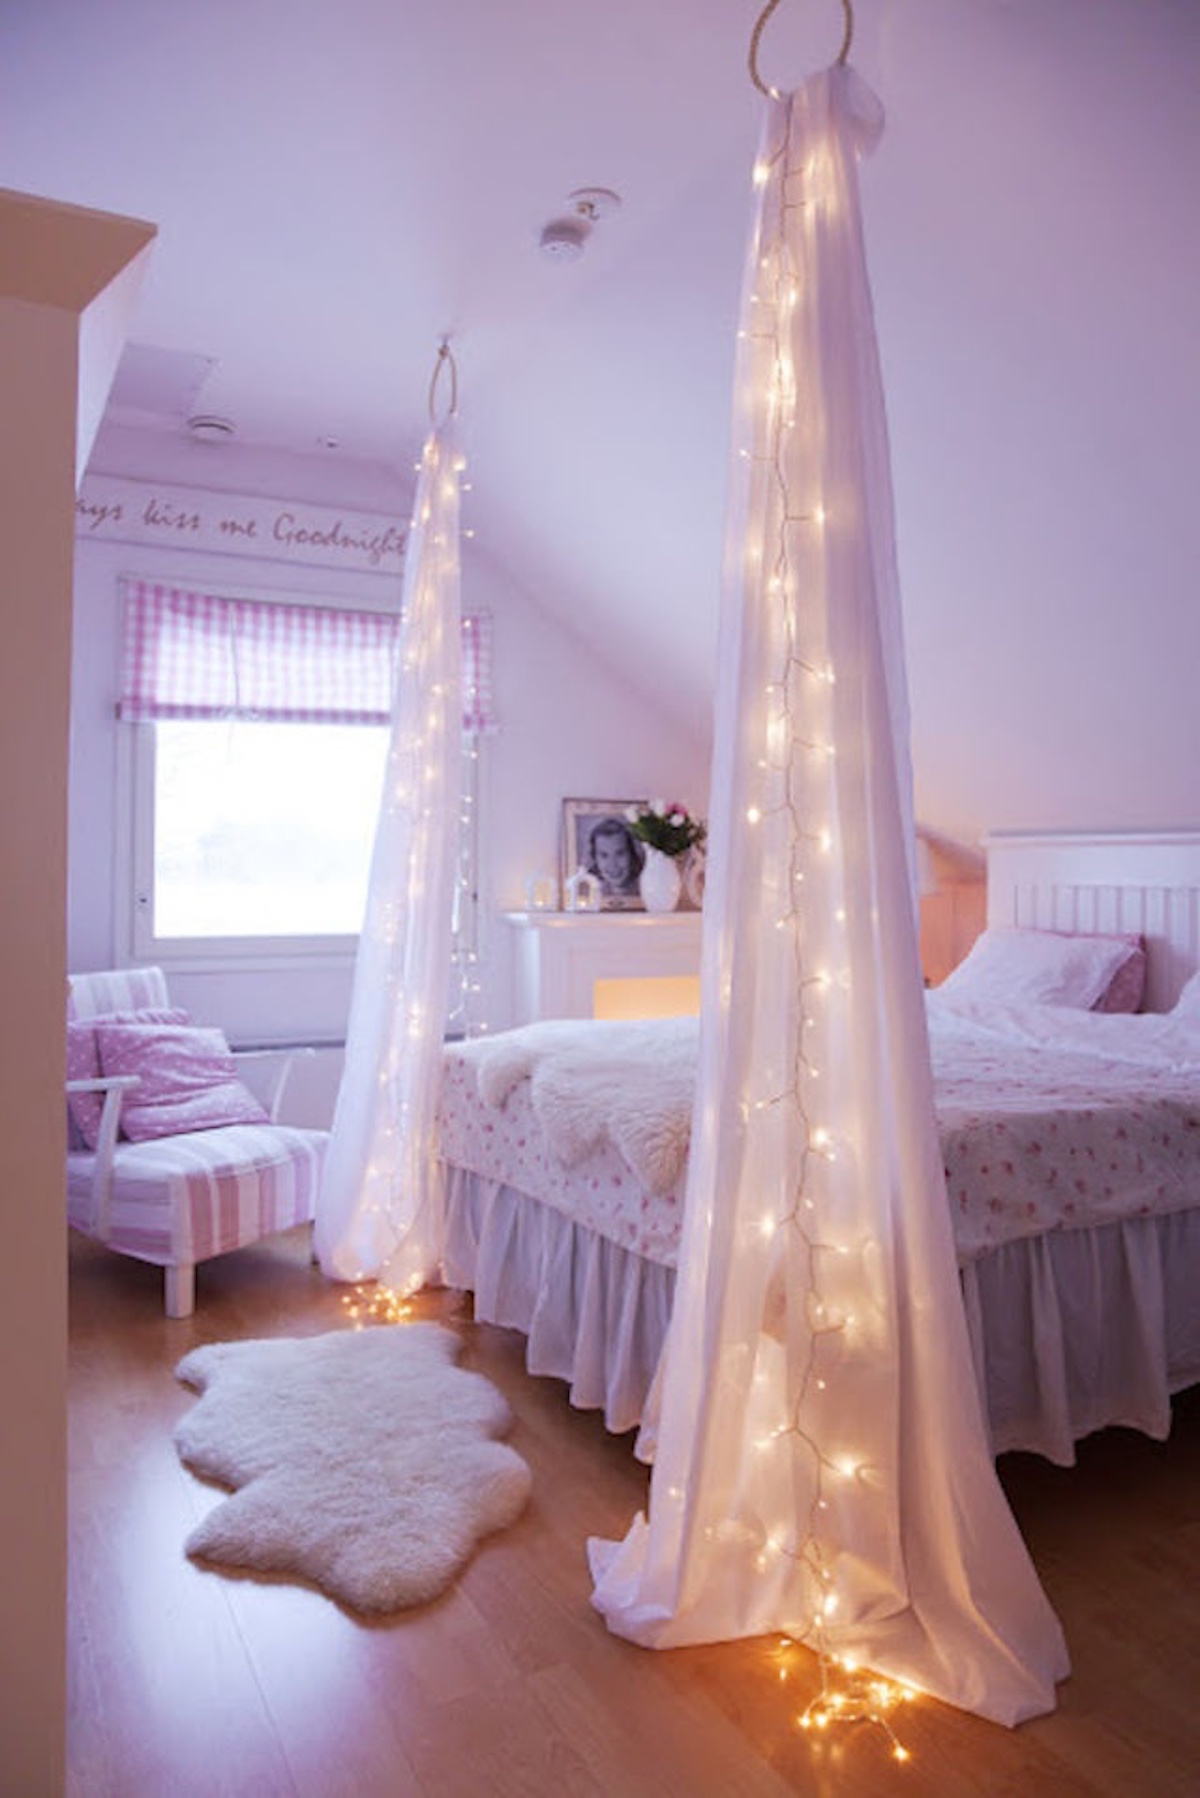 Cheap String Lights Decor For Making Your Bedroom Cozy   Page 2 of 2